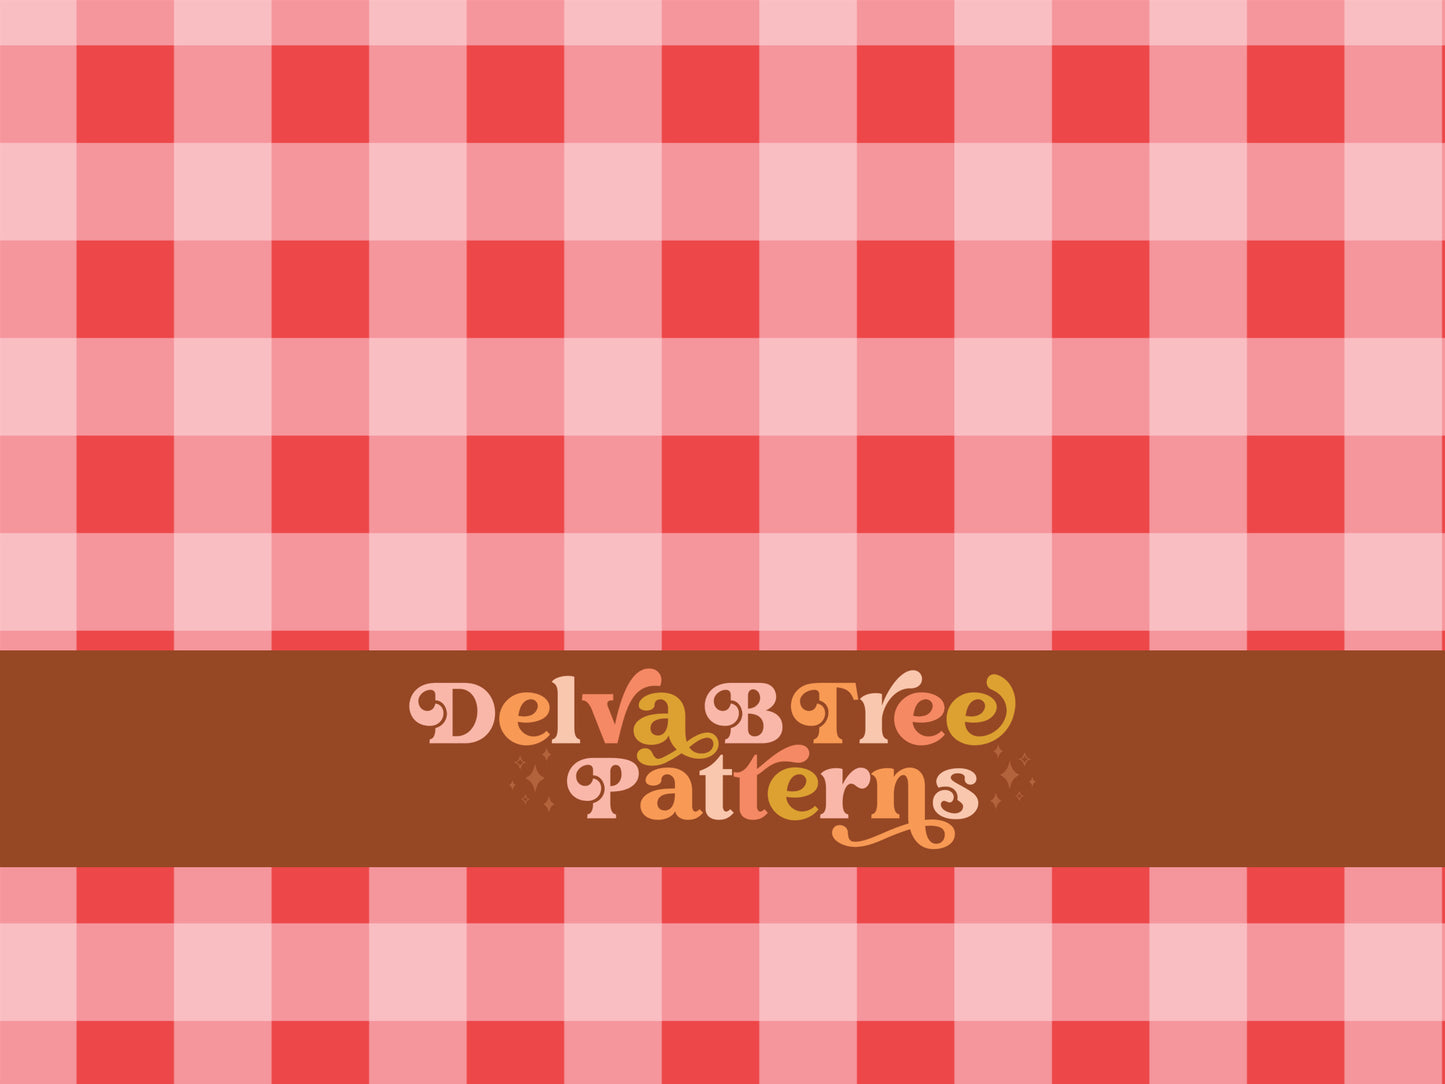 One inch red and pink gingham seamless file for fabric printing. Classic Buffalo Checked Repeat Pattern for textiles, polymailers, baby lovey blankets, nursery crib bedding, kids clothing, girls hair accessories, home decor accents, pet products.